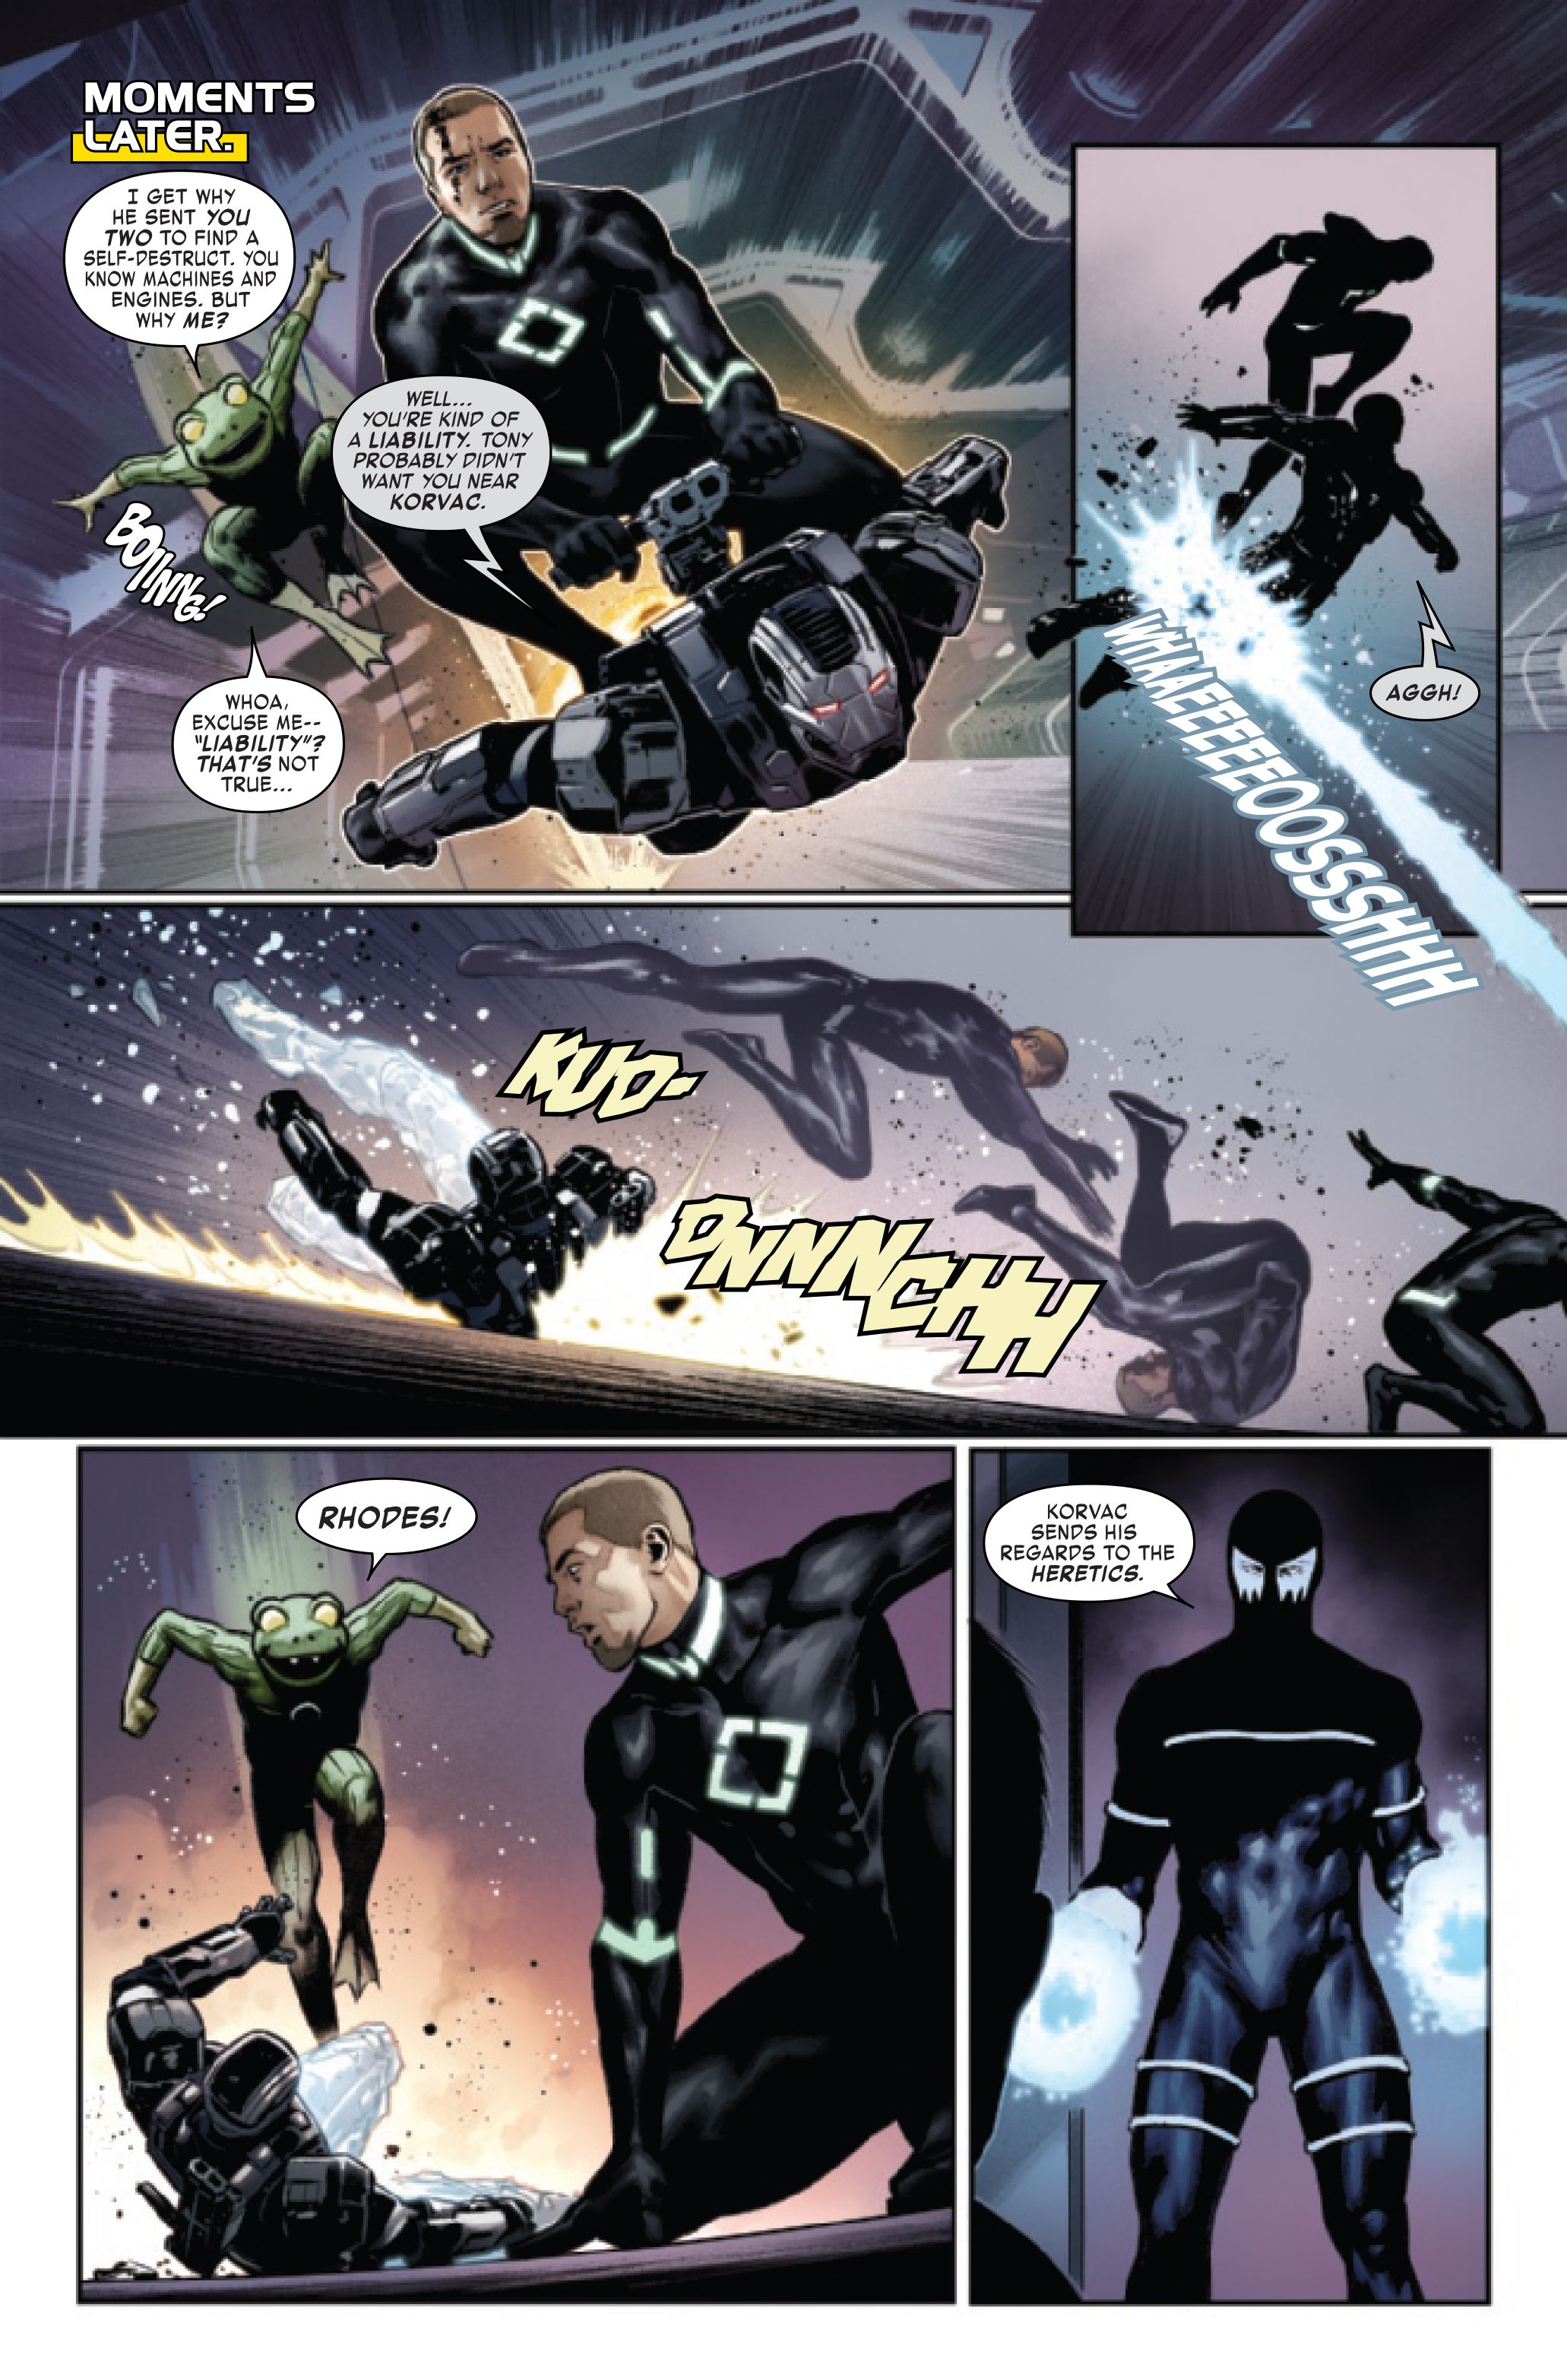 Page 5 of Iron Man #13, by Christopher Cantwell and Cafu.